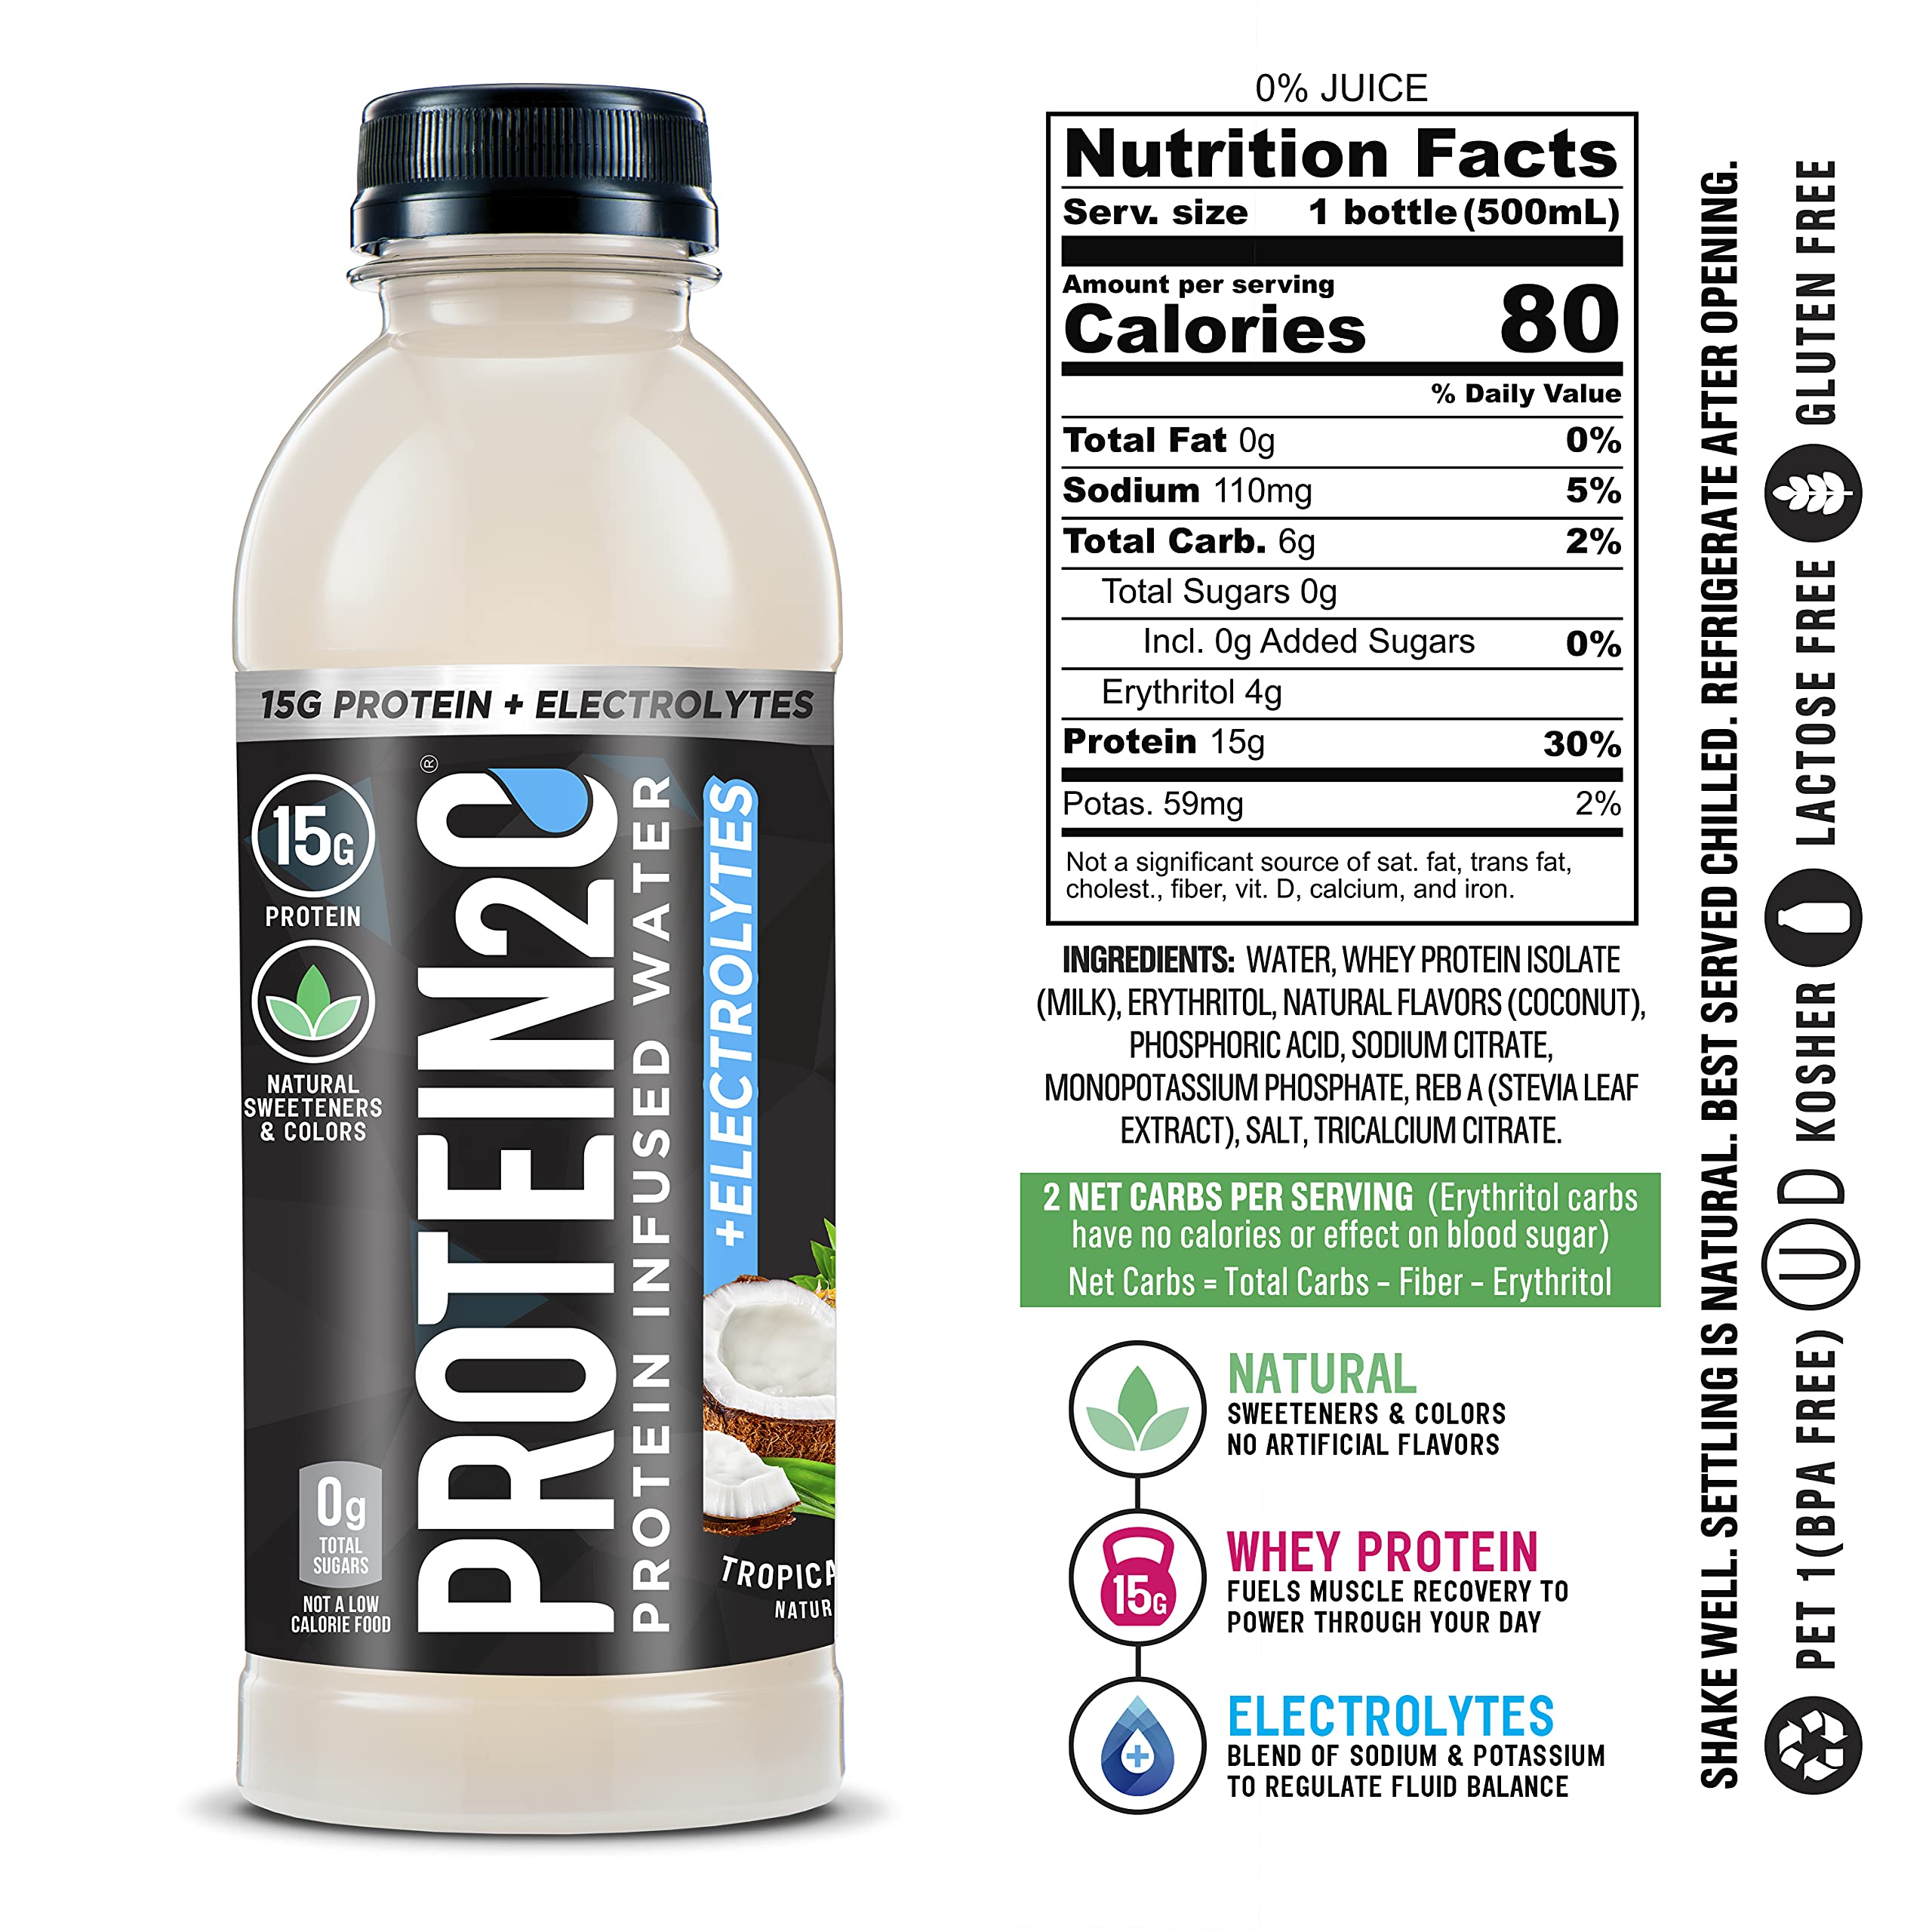 Protein2o 15g Whey Protein Isolate Infused Water Plus Electrolytes, Sugar Free Sports Drink, Ready To Drink, Gluten Free, Lactose Free, Electrolyte Variety Pack, 16.9 fl oz Bottle (12 Count)